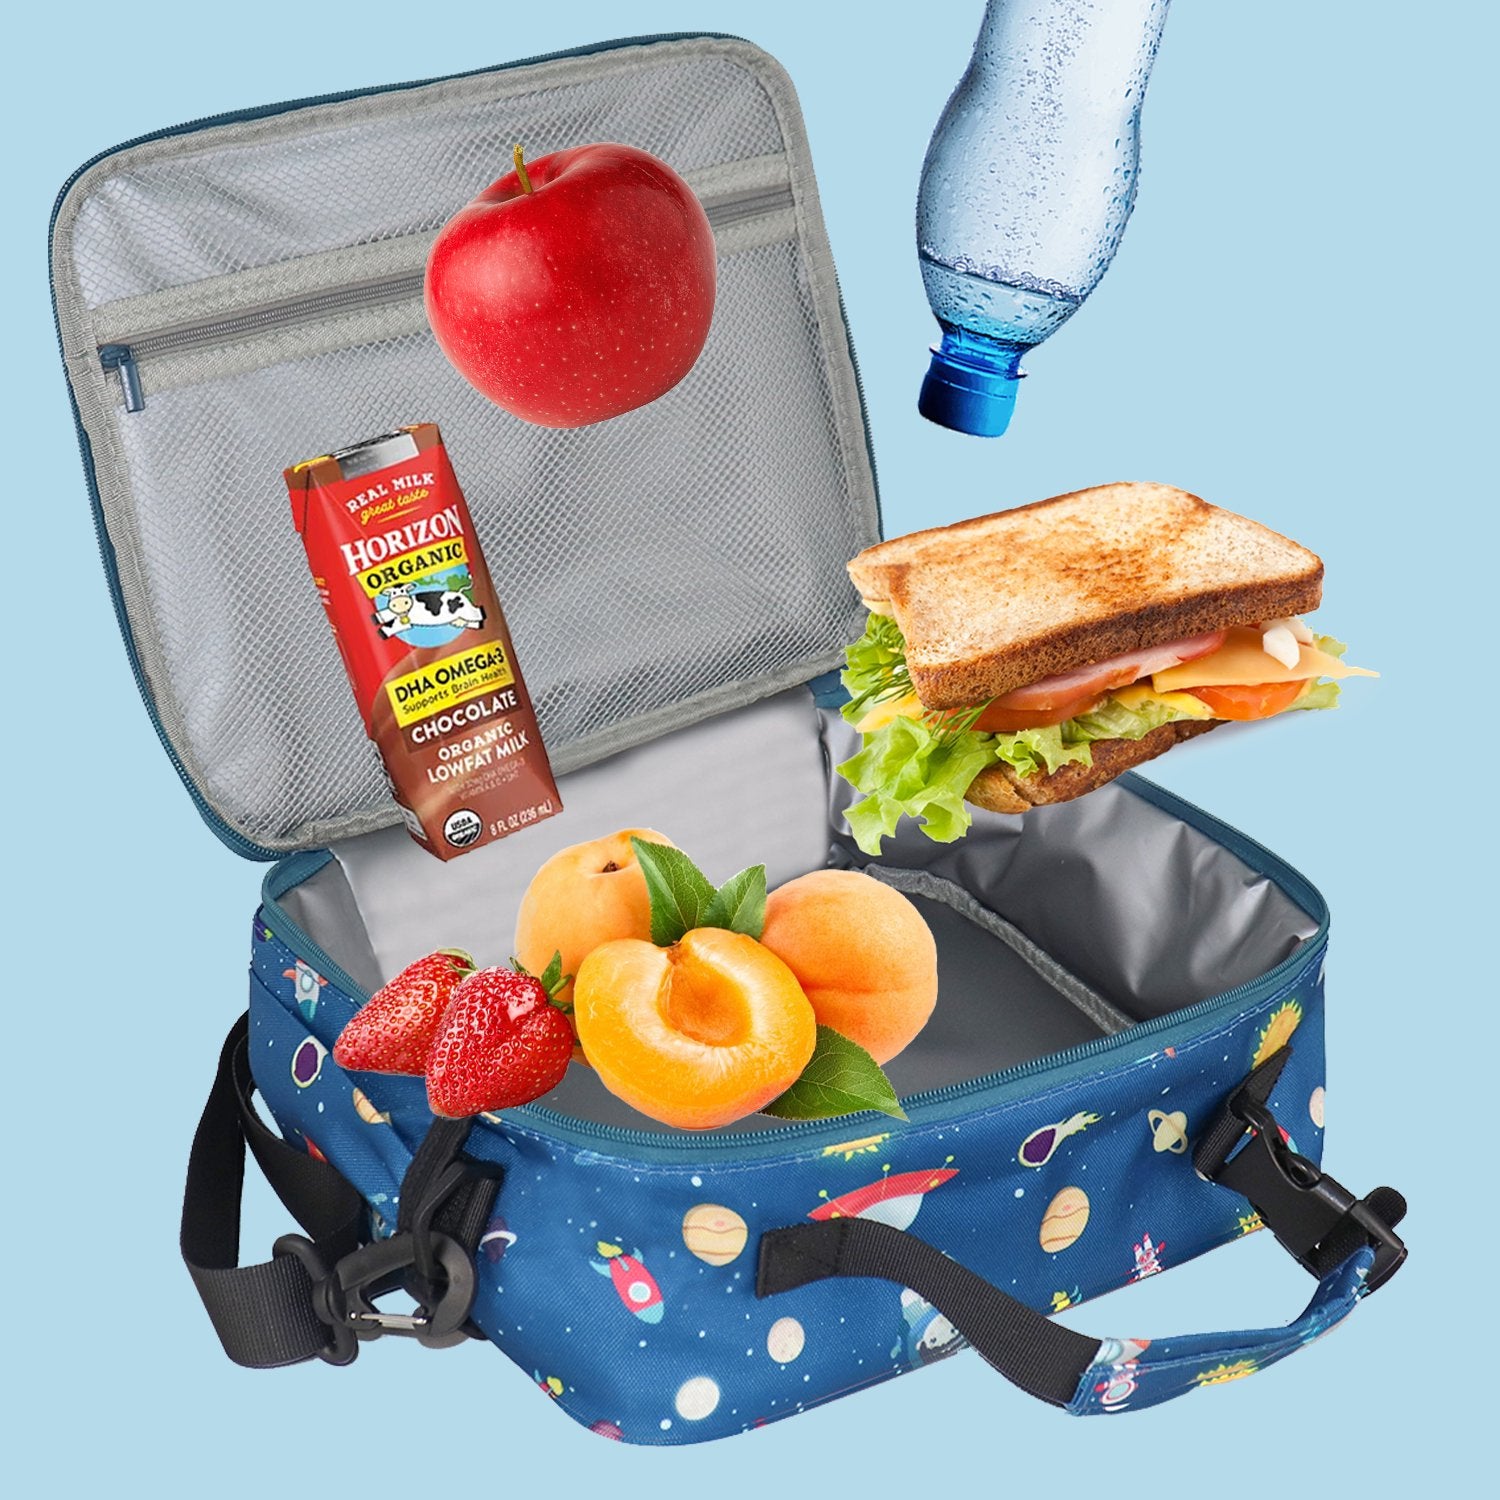 Mesa Space Lunch Box for Kids - Kids Lunchbox for School, Daycare, Kindergarten - Insulated Lunch Box for Girls & Boys - With Handle, Shoulder Strap, Zipper Front Pocket & Side Bottle Holder